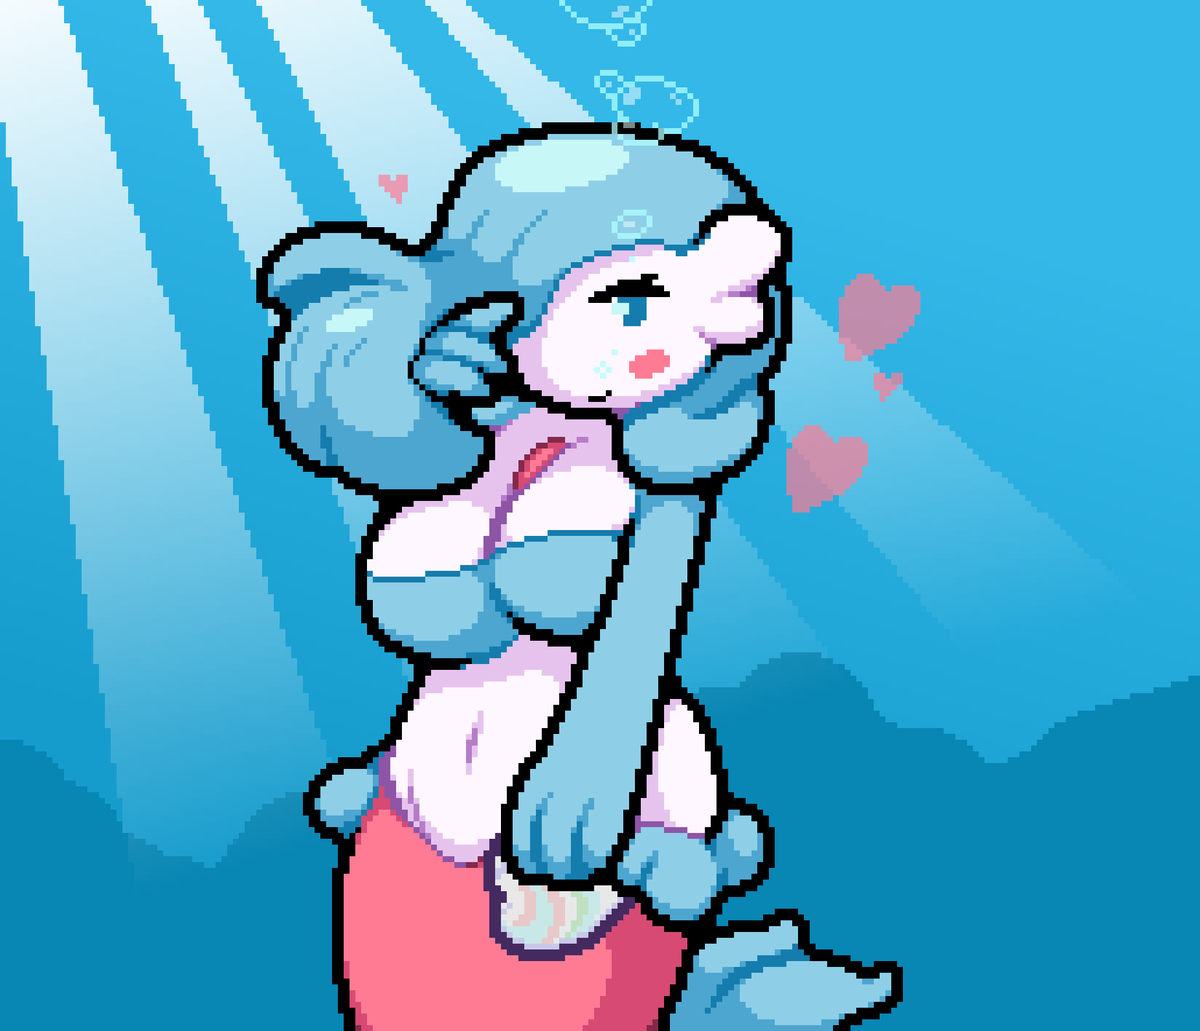 Back with more mermaids this mermay, drawing another pic of the Mer-Gardevoir that peeps wanted to see more of 'v'

She's brought you a heart scale as a gift
#Pokemon #Gardevoir